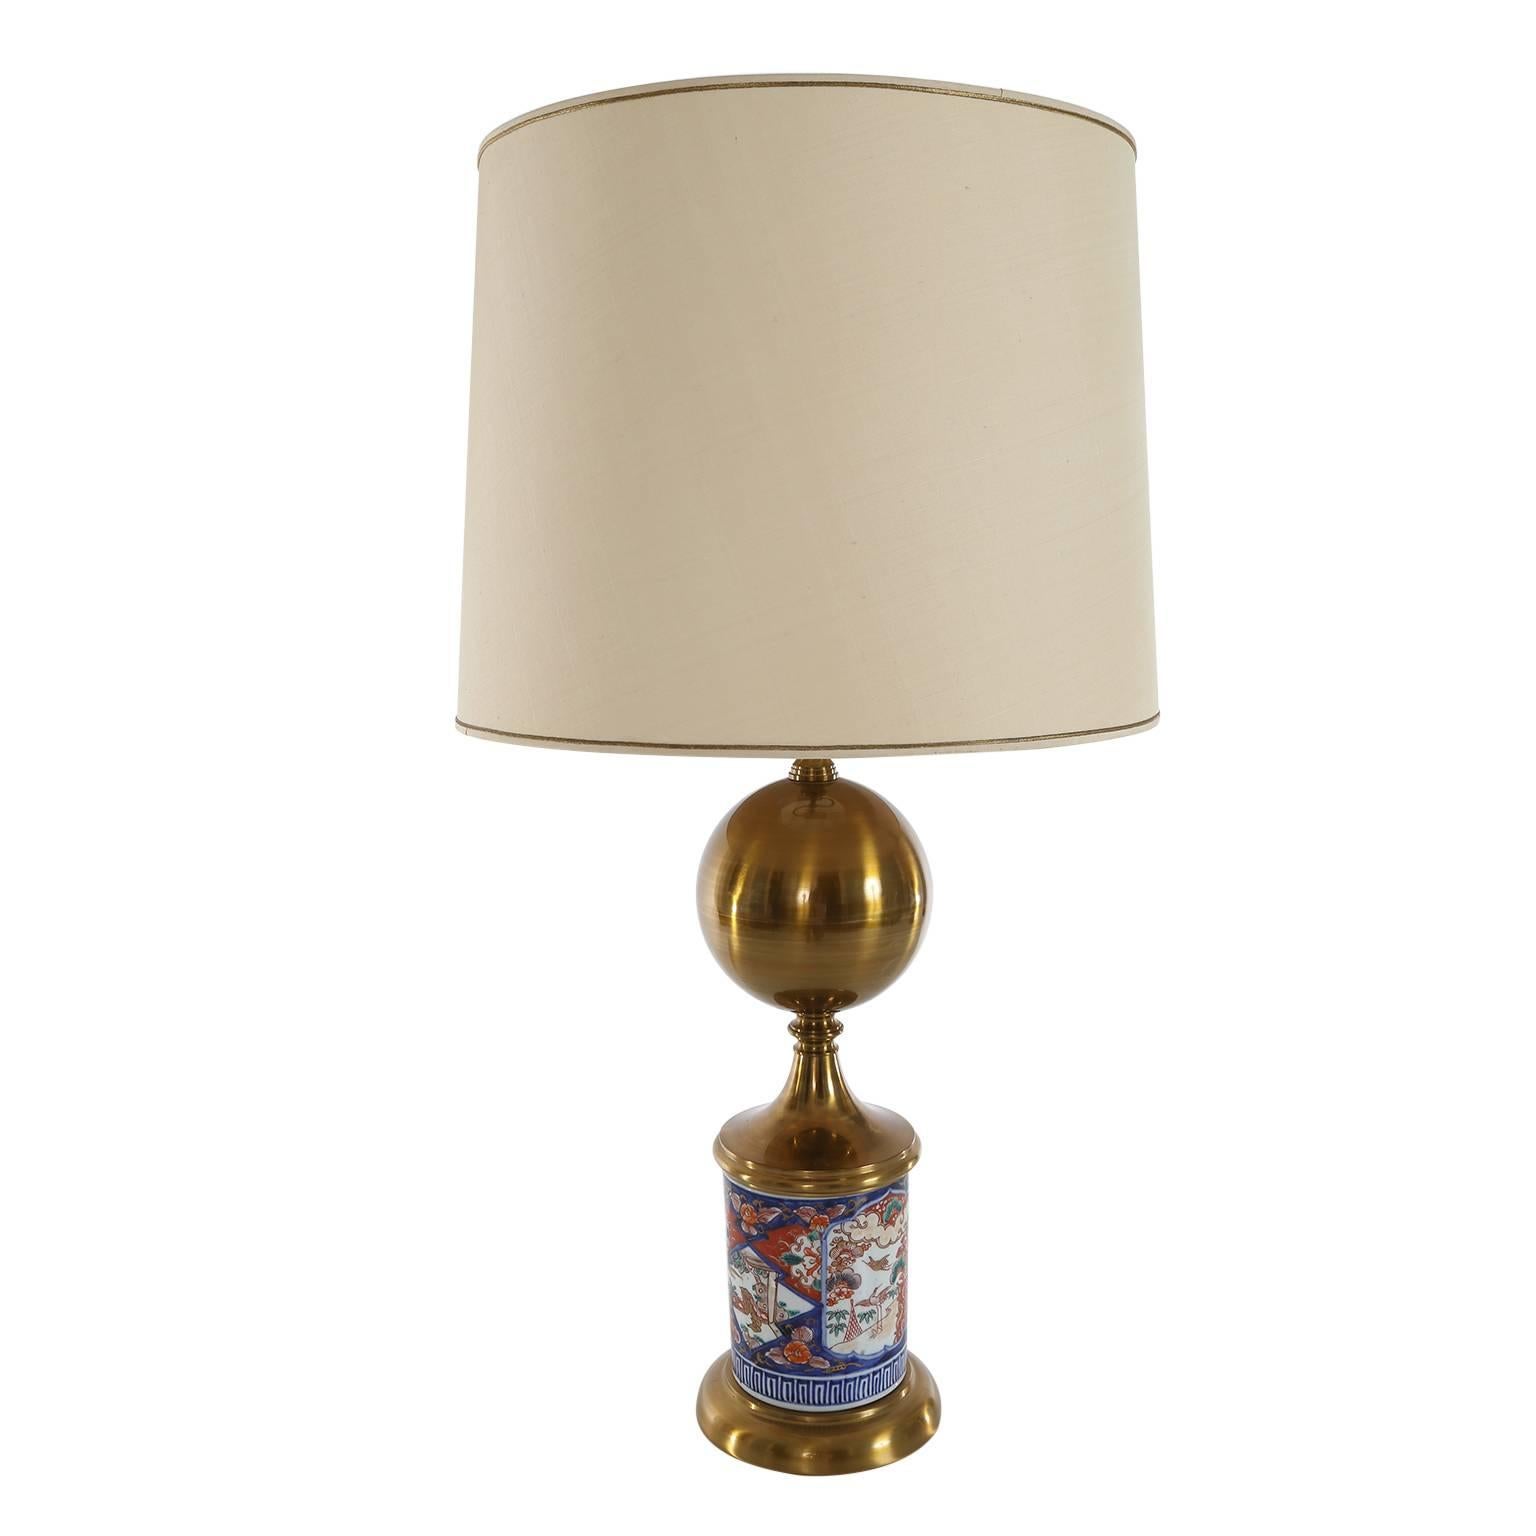 Pair of Midcentury table lamps with a porcelain base in Chinese decor in cobalt blue and saffron on white subfont.